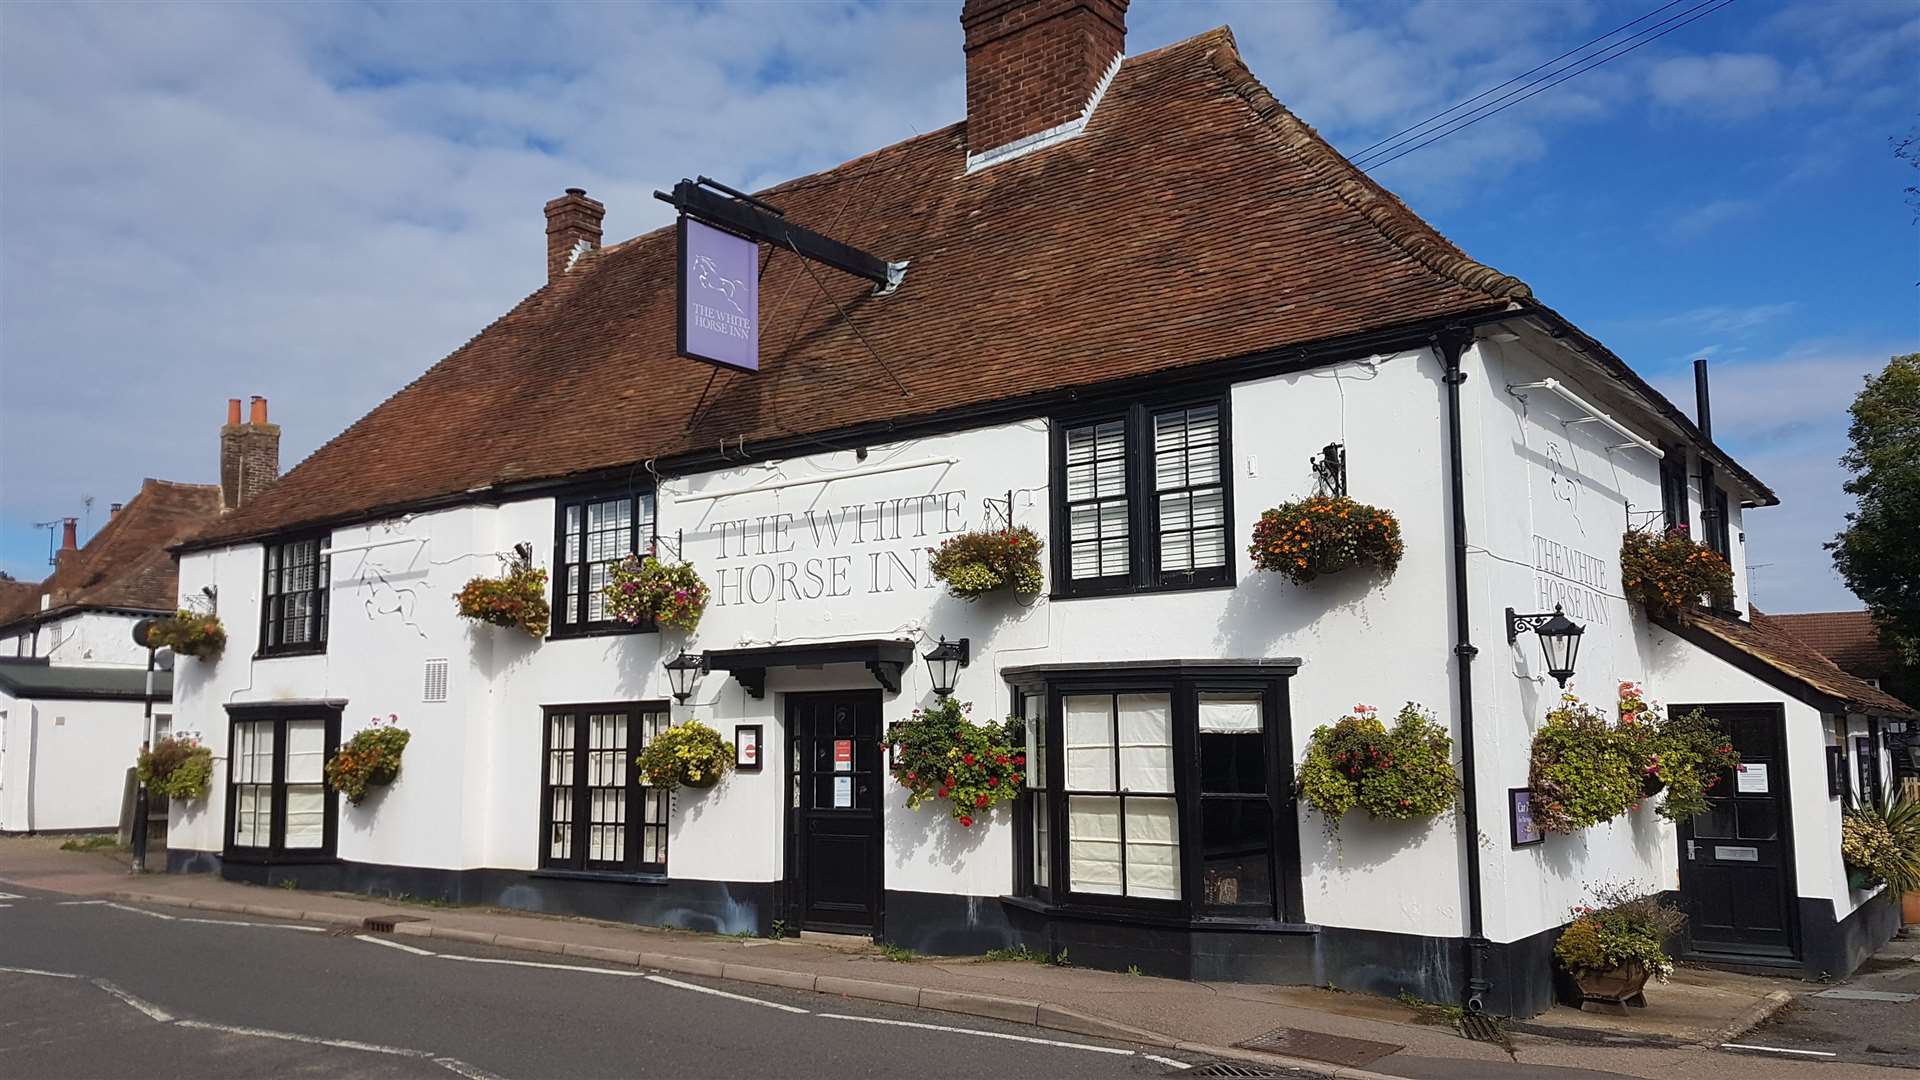 Two men are thought to have targeted the White Horse Inn on Friday